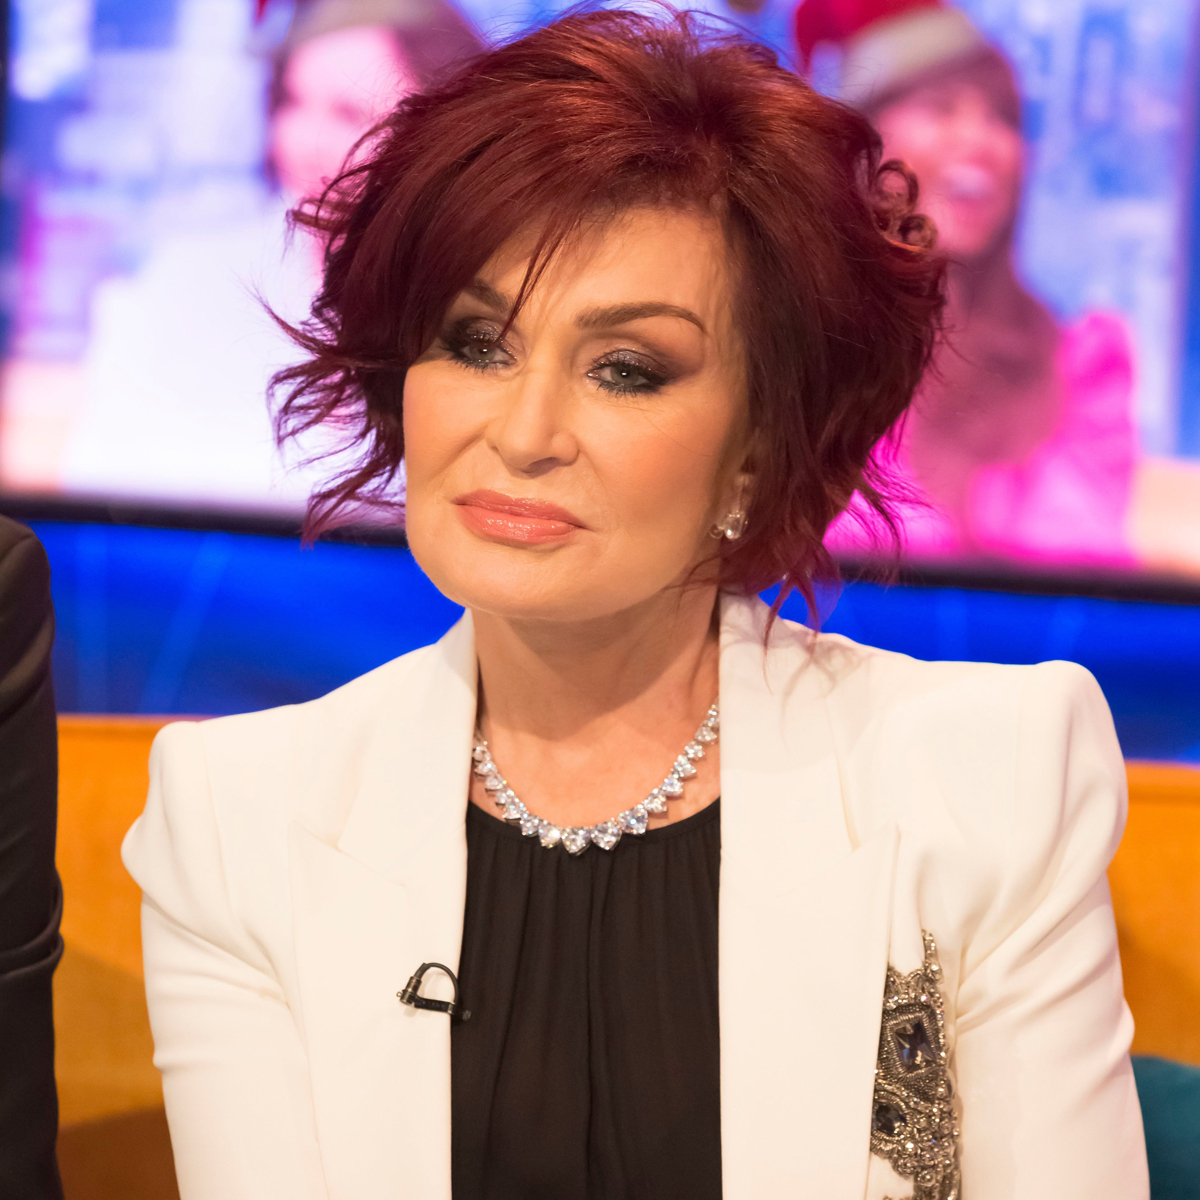 Sharon Osbourne claims that CBS “surprised” her in Piers Morgan’s discussion